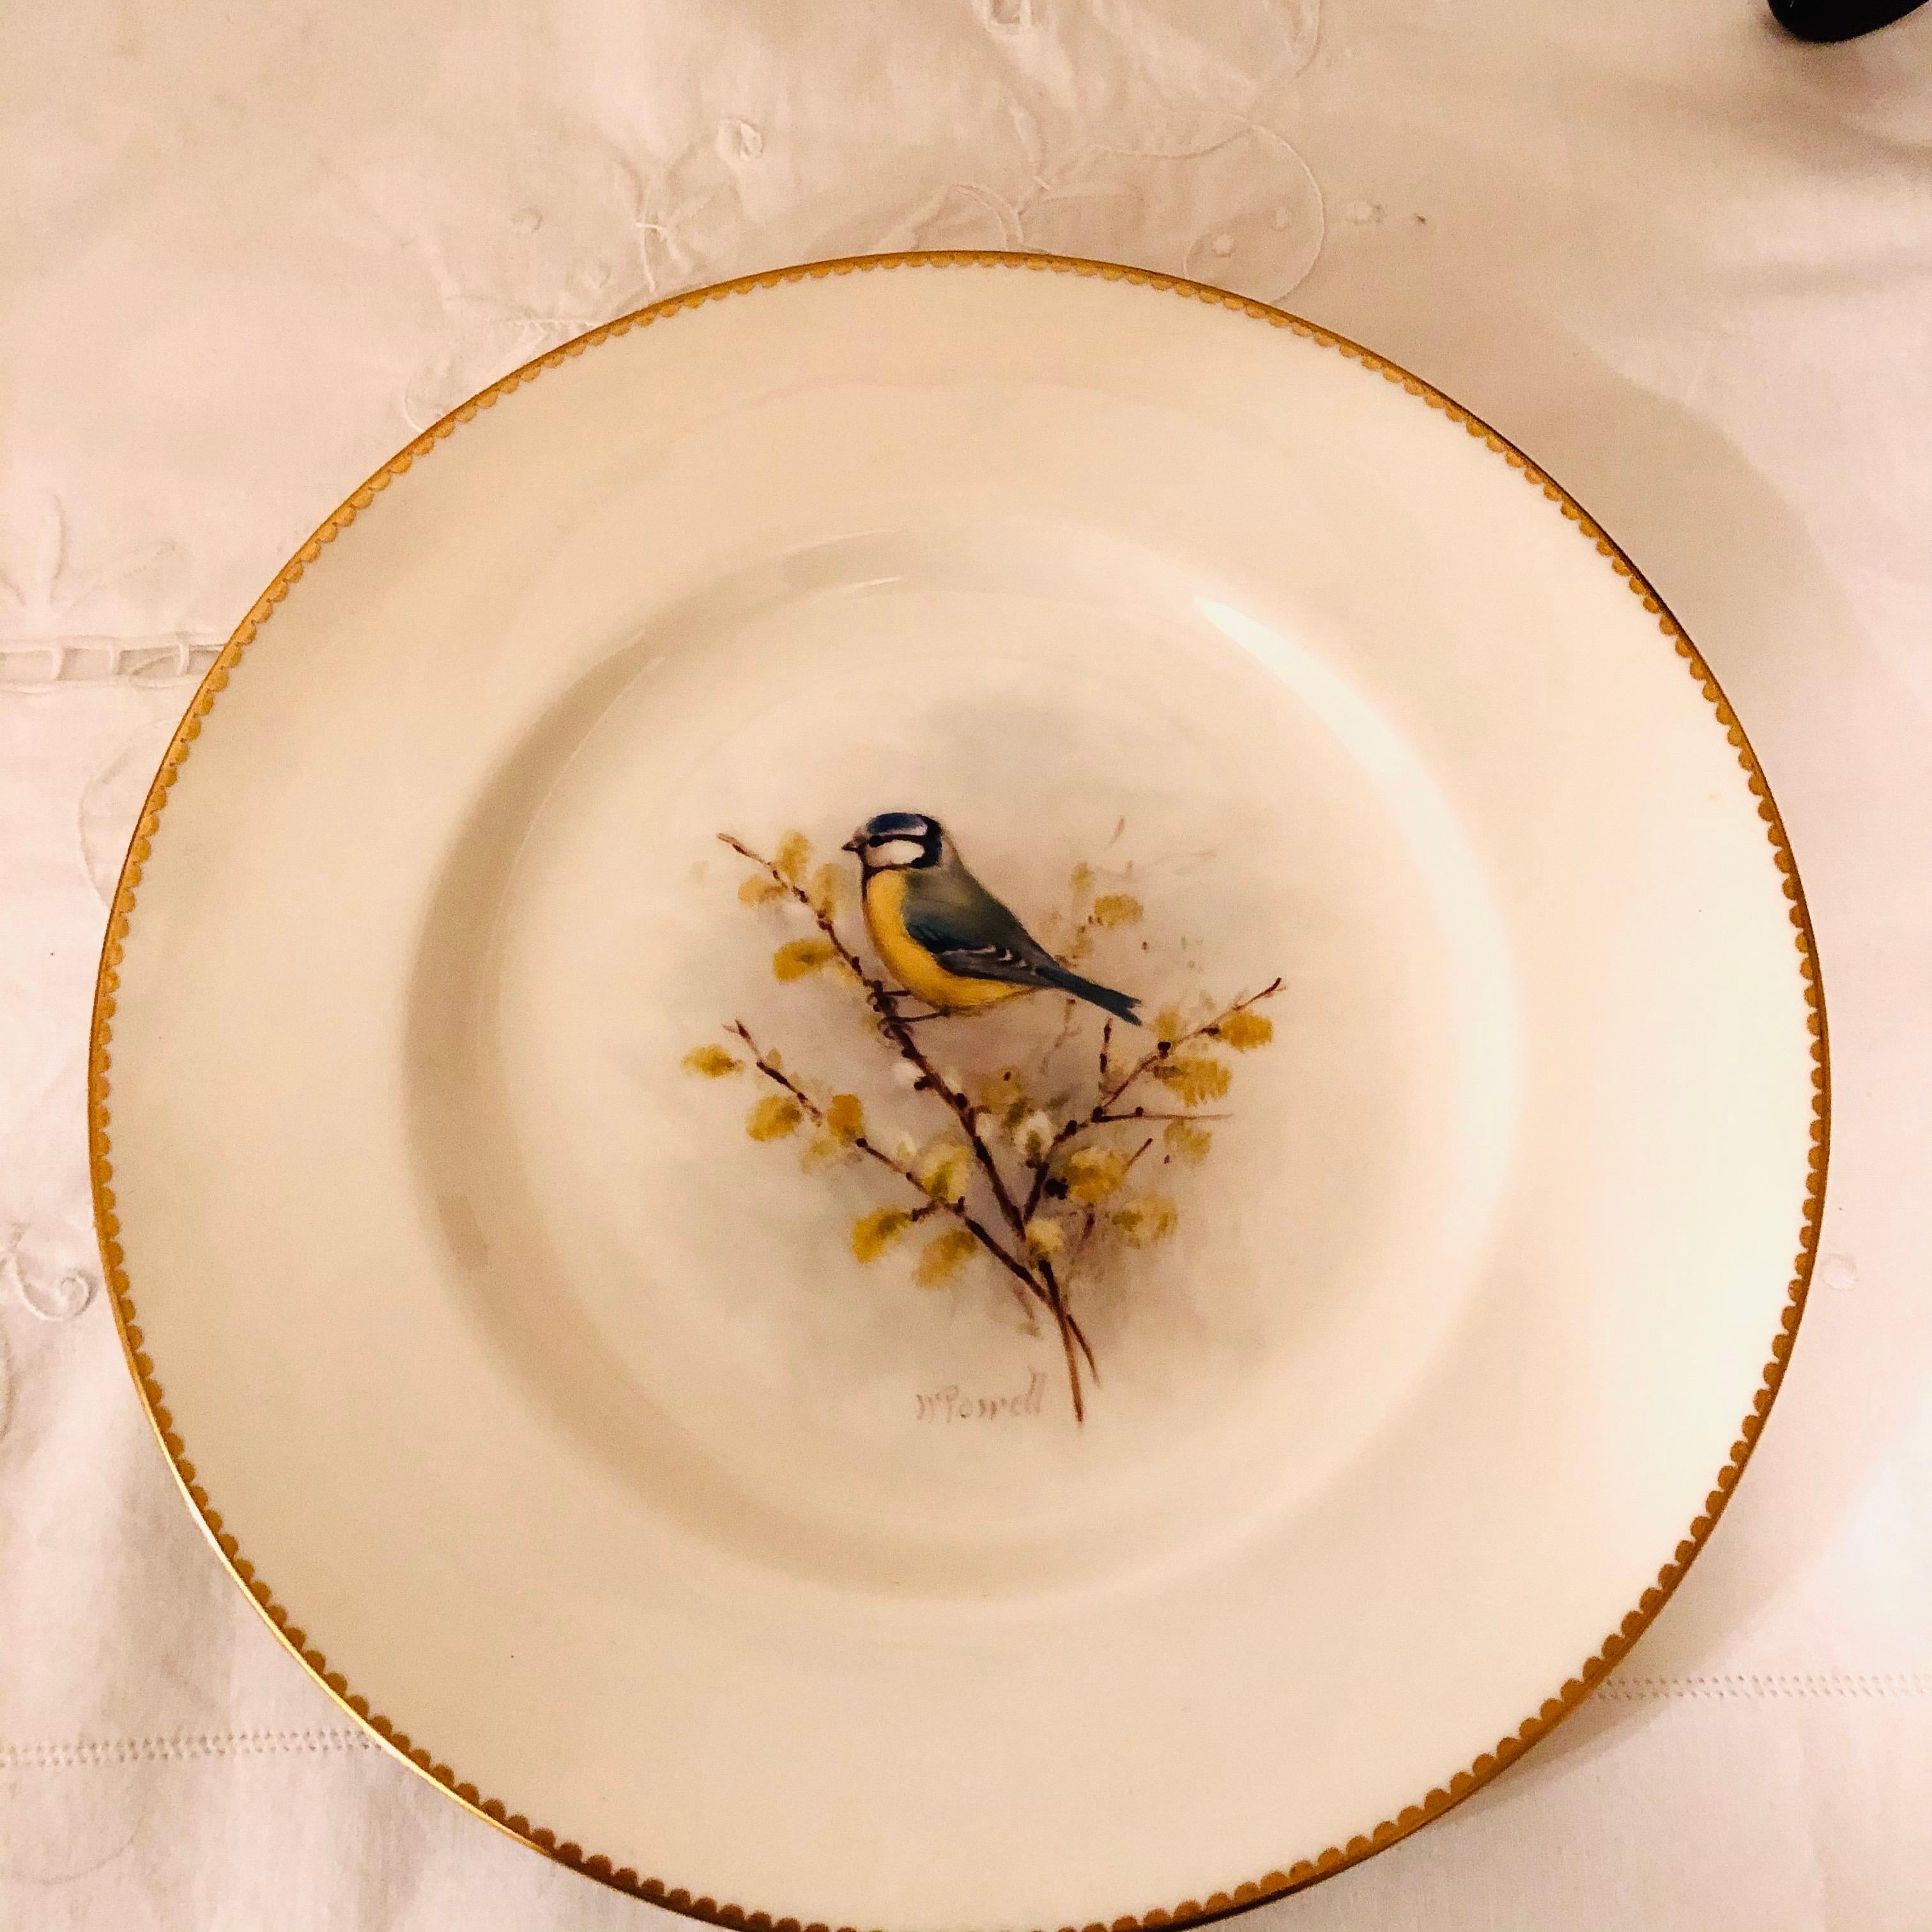 English Set of 11 Royal Worcester Plates Each Hand Painted with Different Bird Paintings